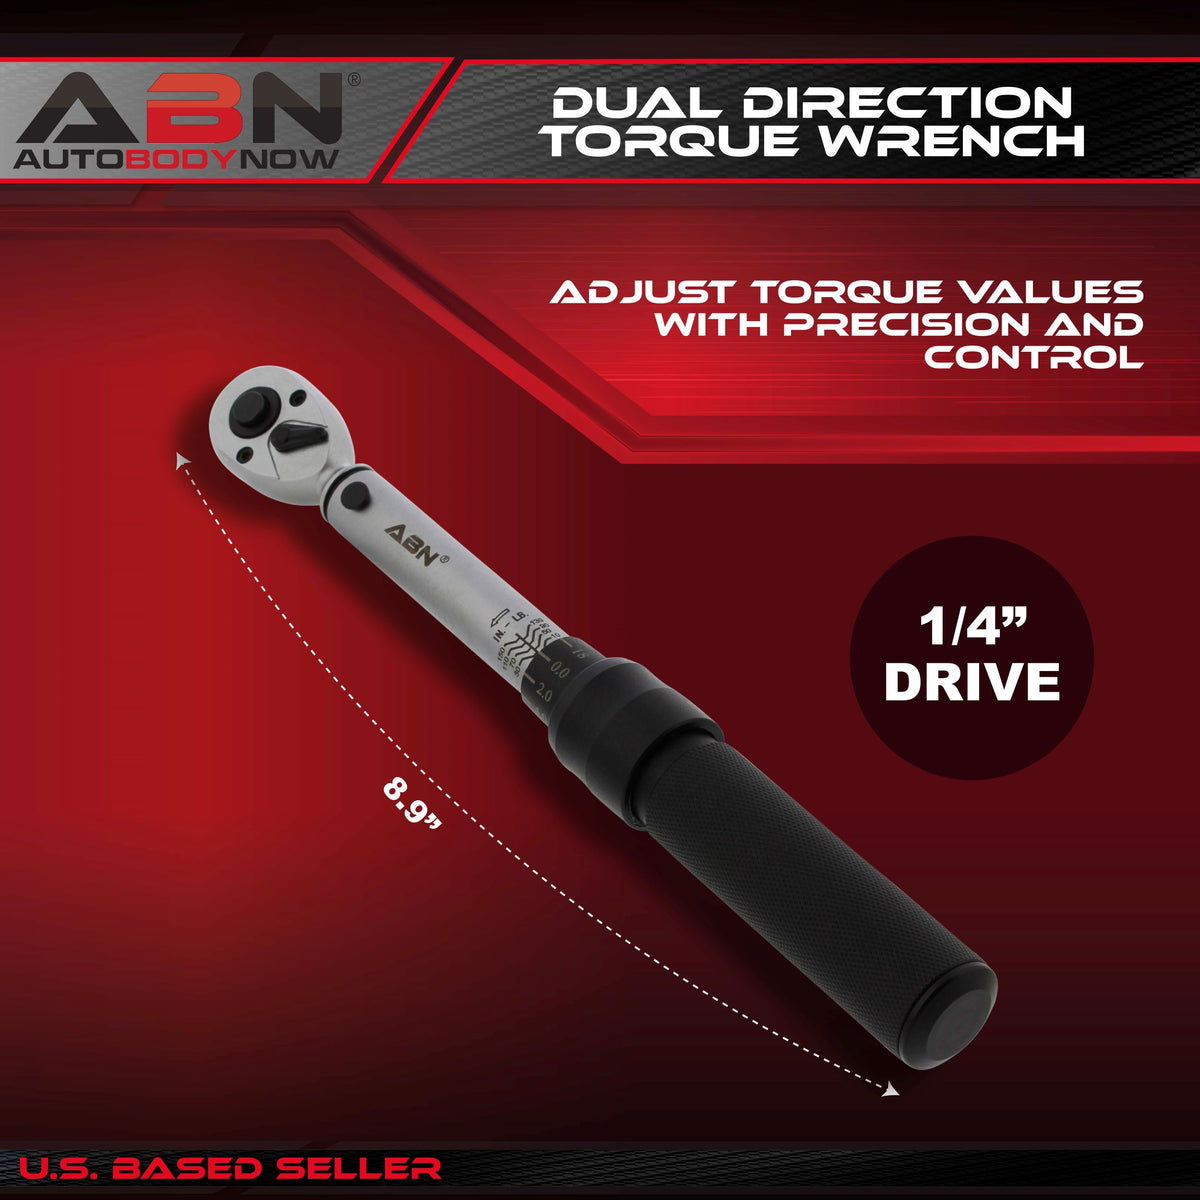 1/4 Drive 10-150 Inch-Pound Torque Wrench - Dual Direction Click